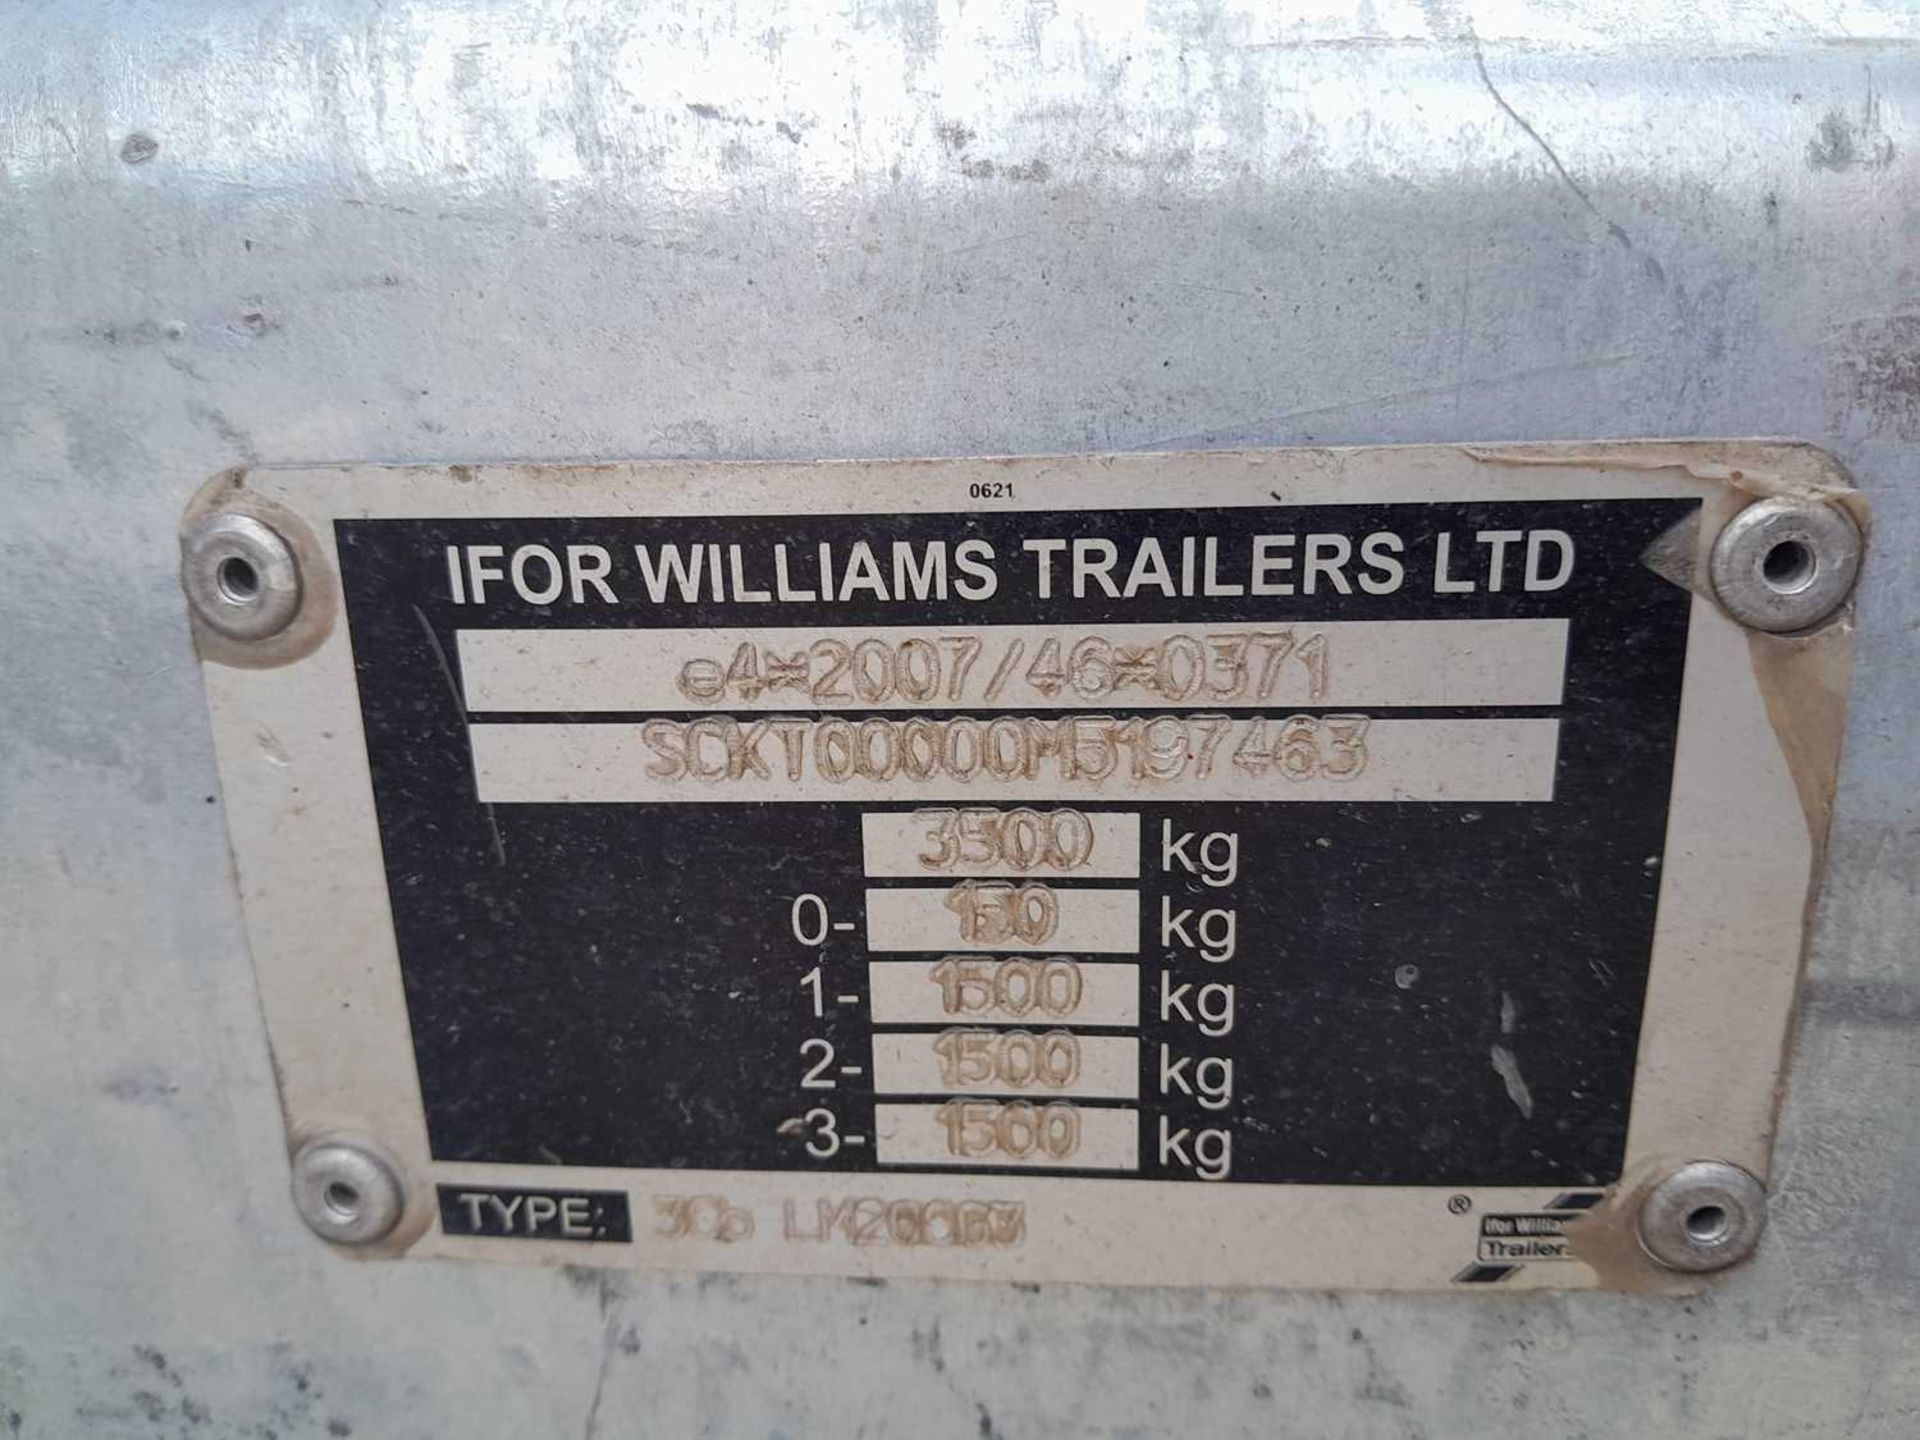 Ifor Williams LM20CG3 Tri Axle Flat Bed Drop Side Trailer - Image 9 of 9